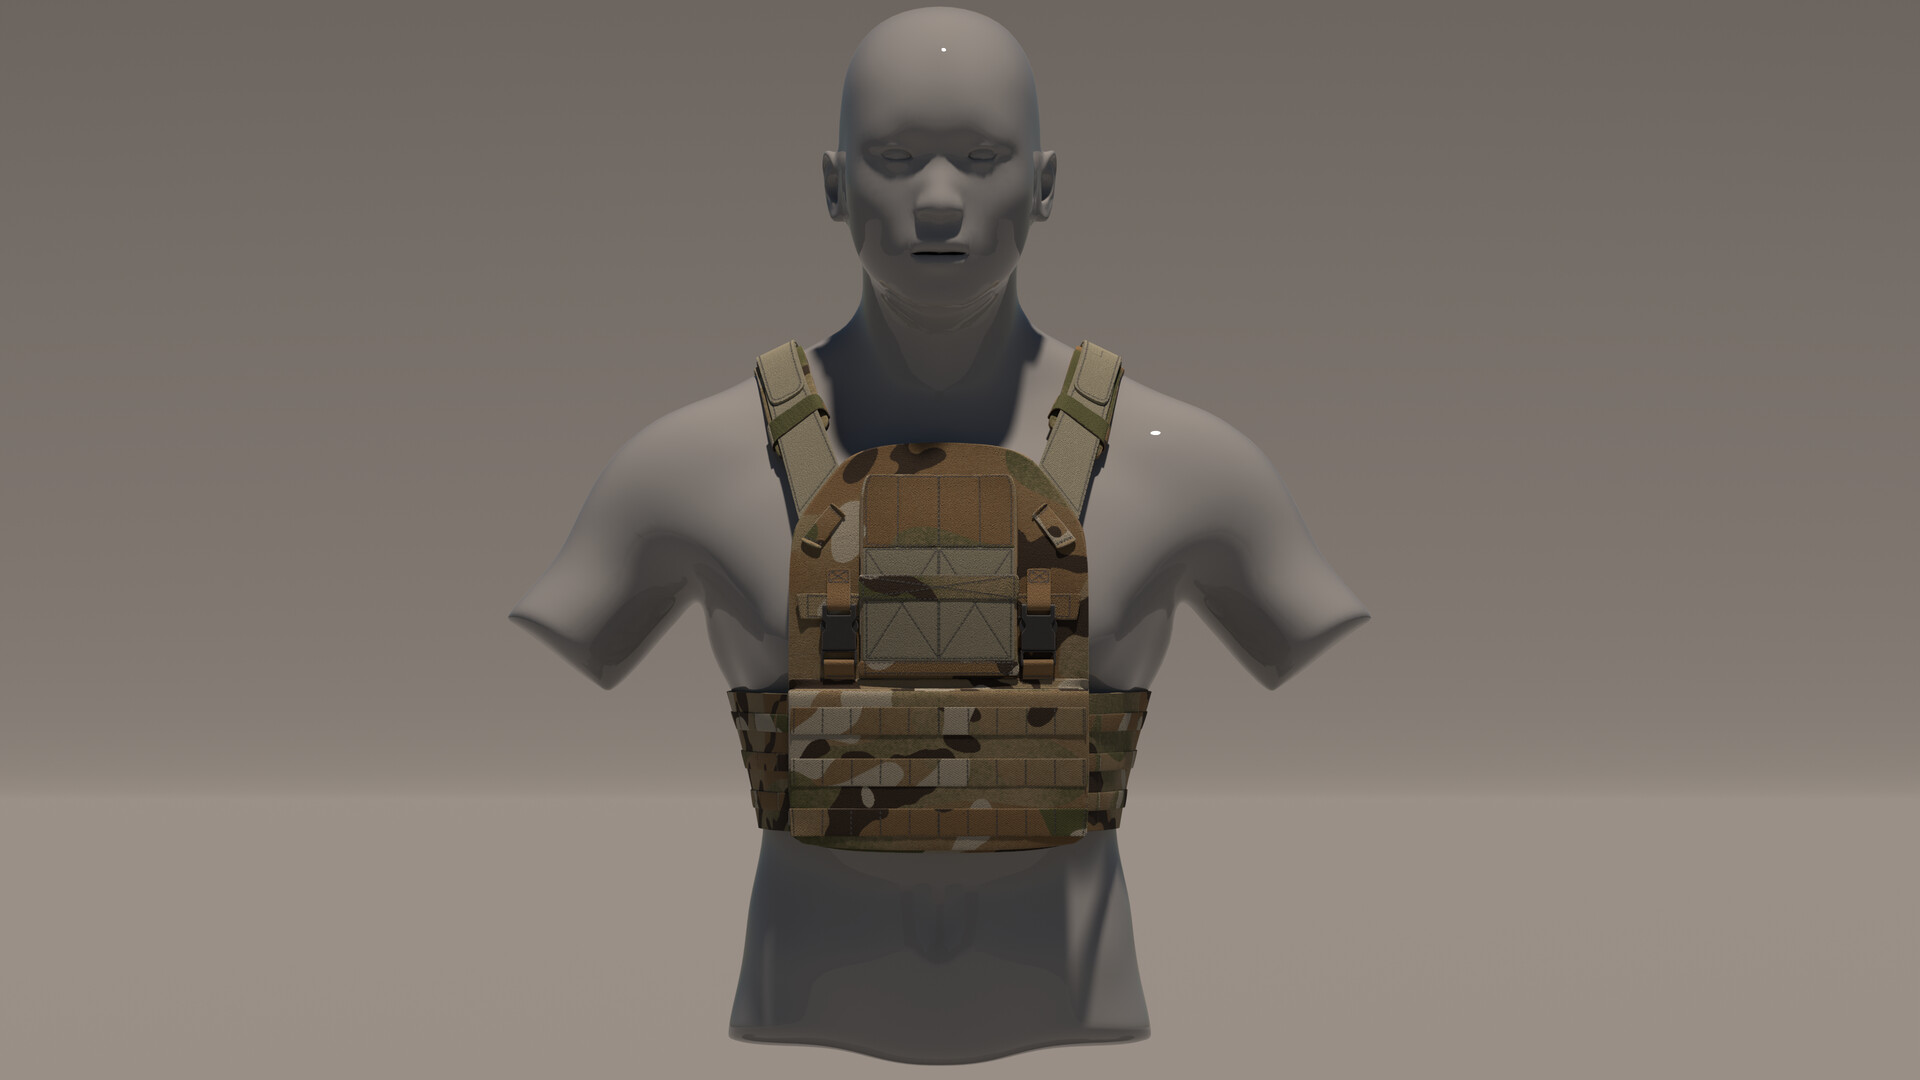 ArtStation - Plate carrier with camo